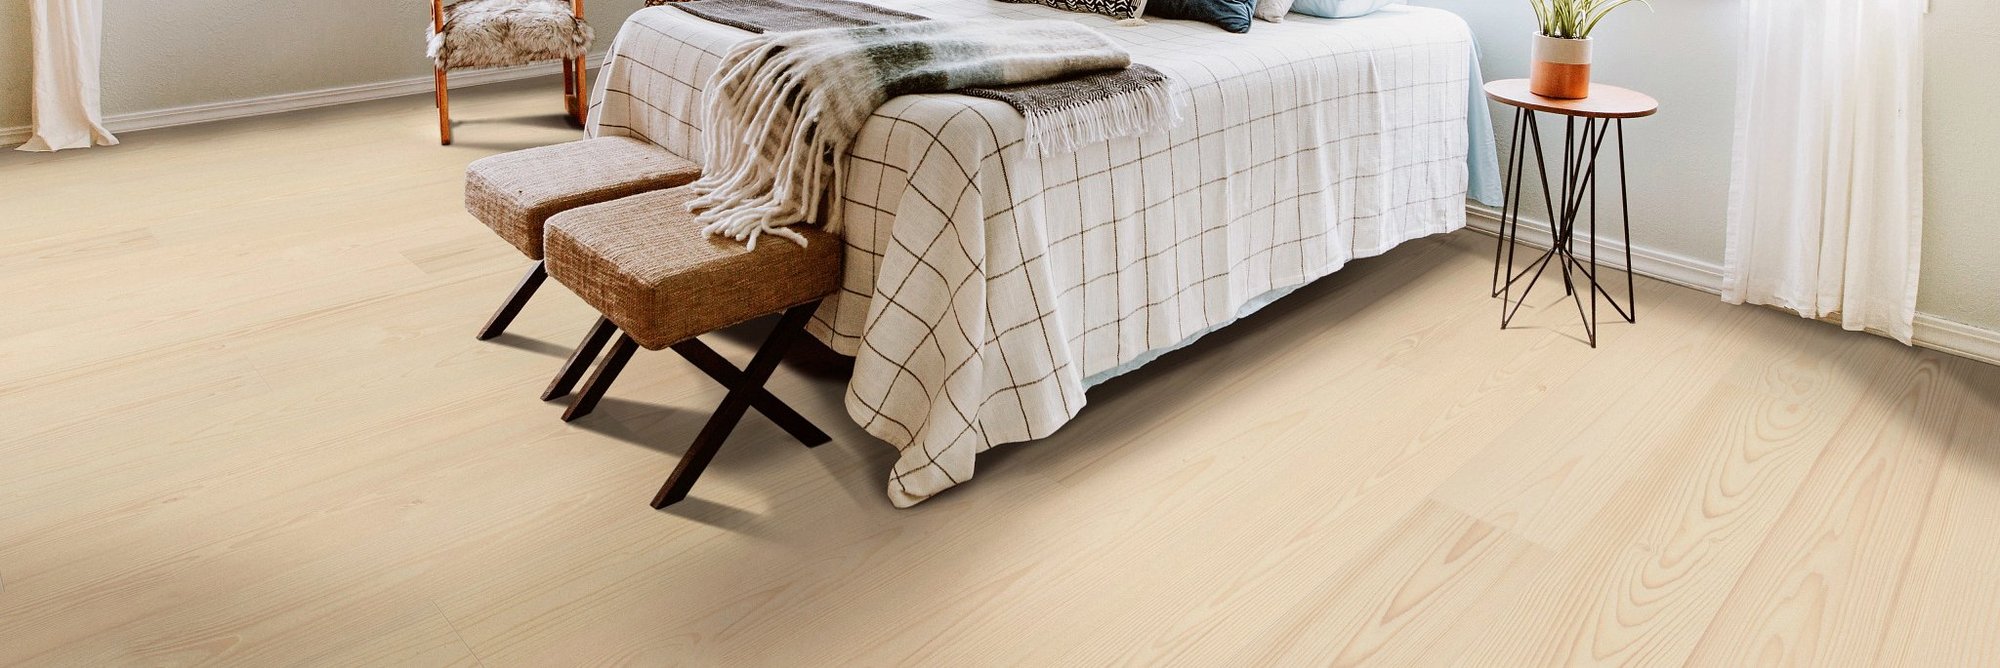 light hardwood flooring for bedroom on Fort Morgan, CO area by Specialty Shoppe Floors